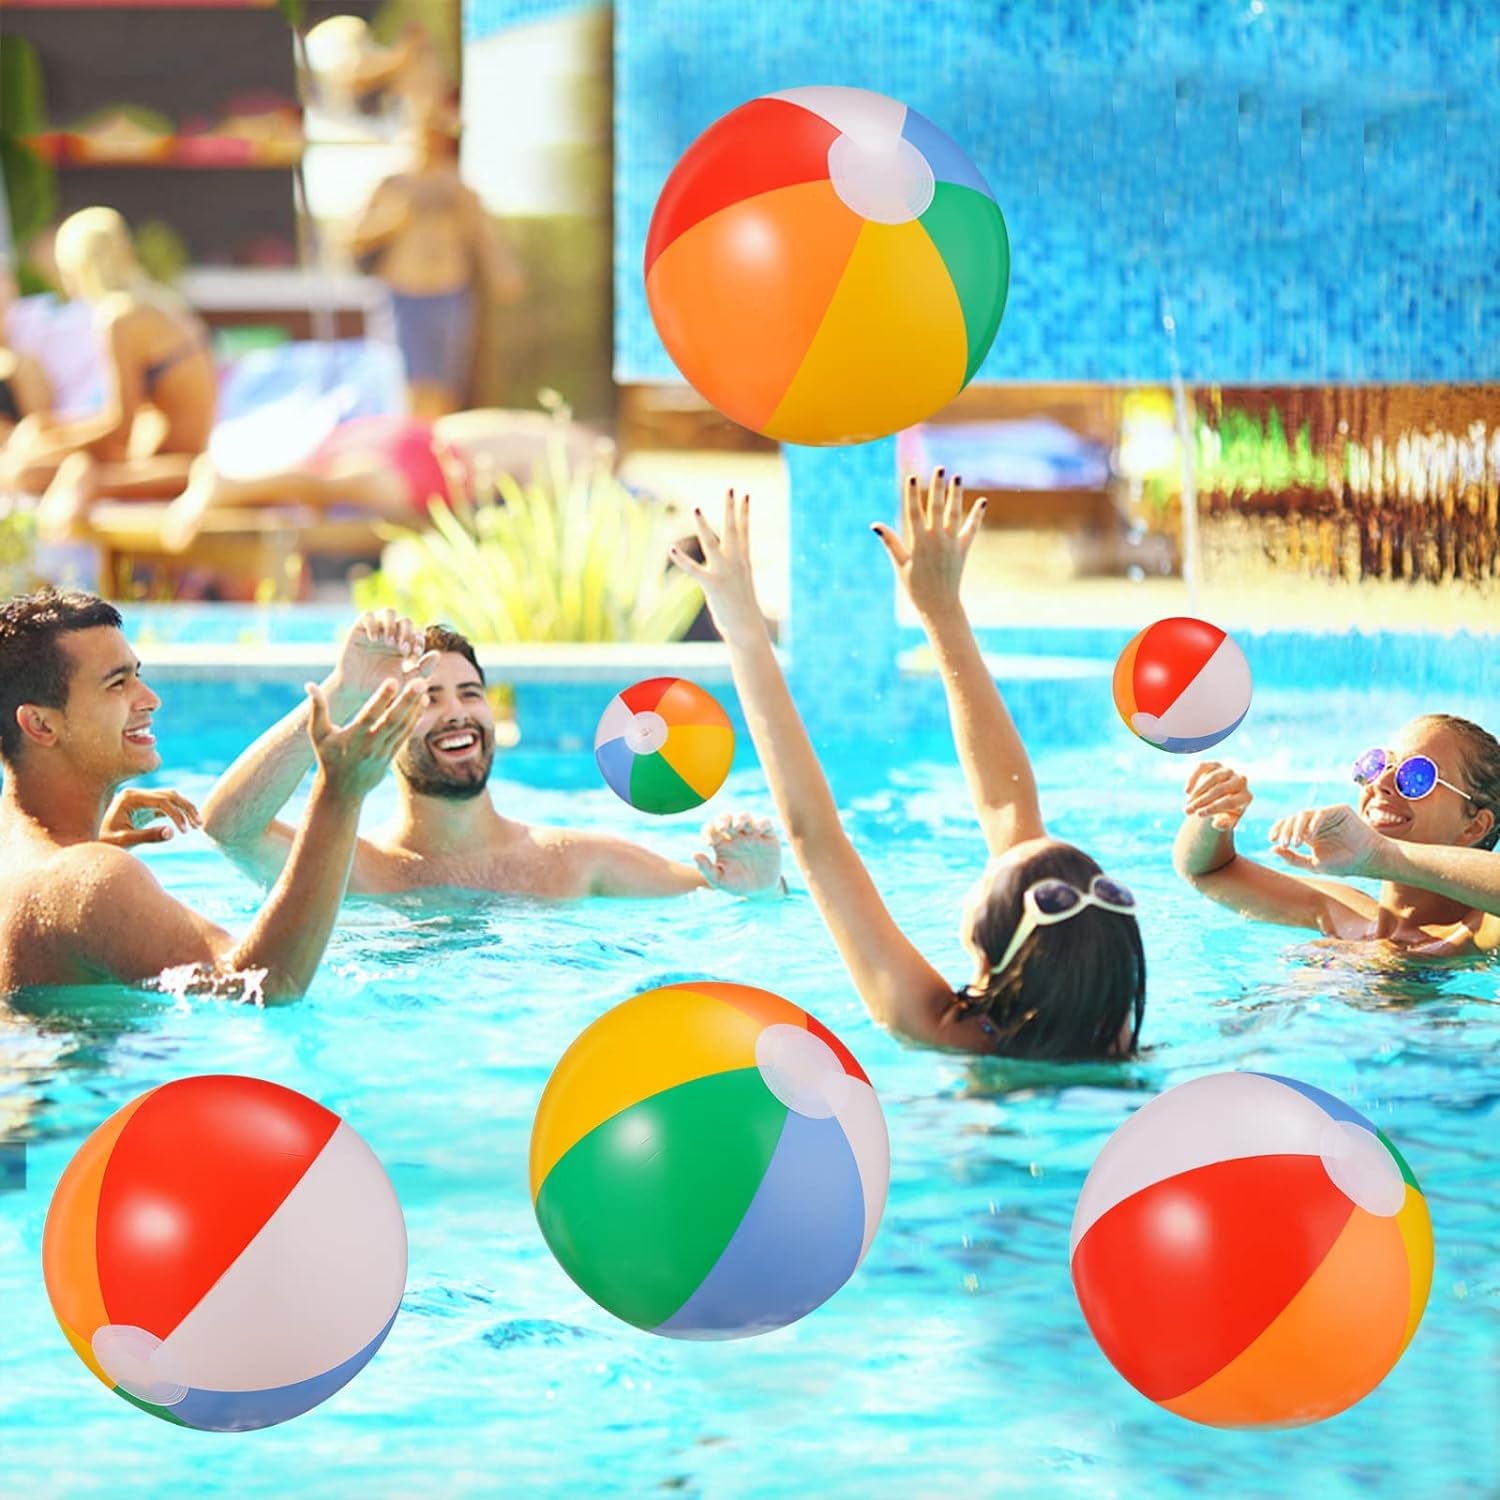 Beach Balls Bulk 24 Pack - 9" Inflatable Beachballs Swimming Pool Toys for Kids Summer Water Games, Kids Birthday Party Favors Lua/Hawaiian Tropical Theme Decorations Supplies